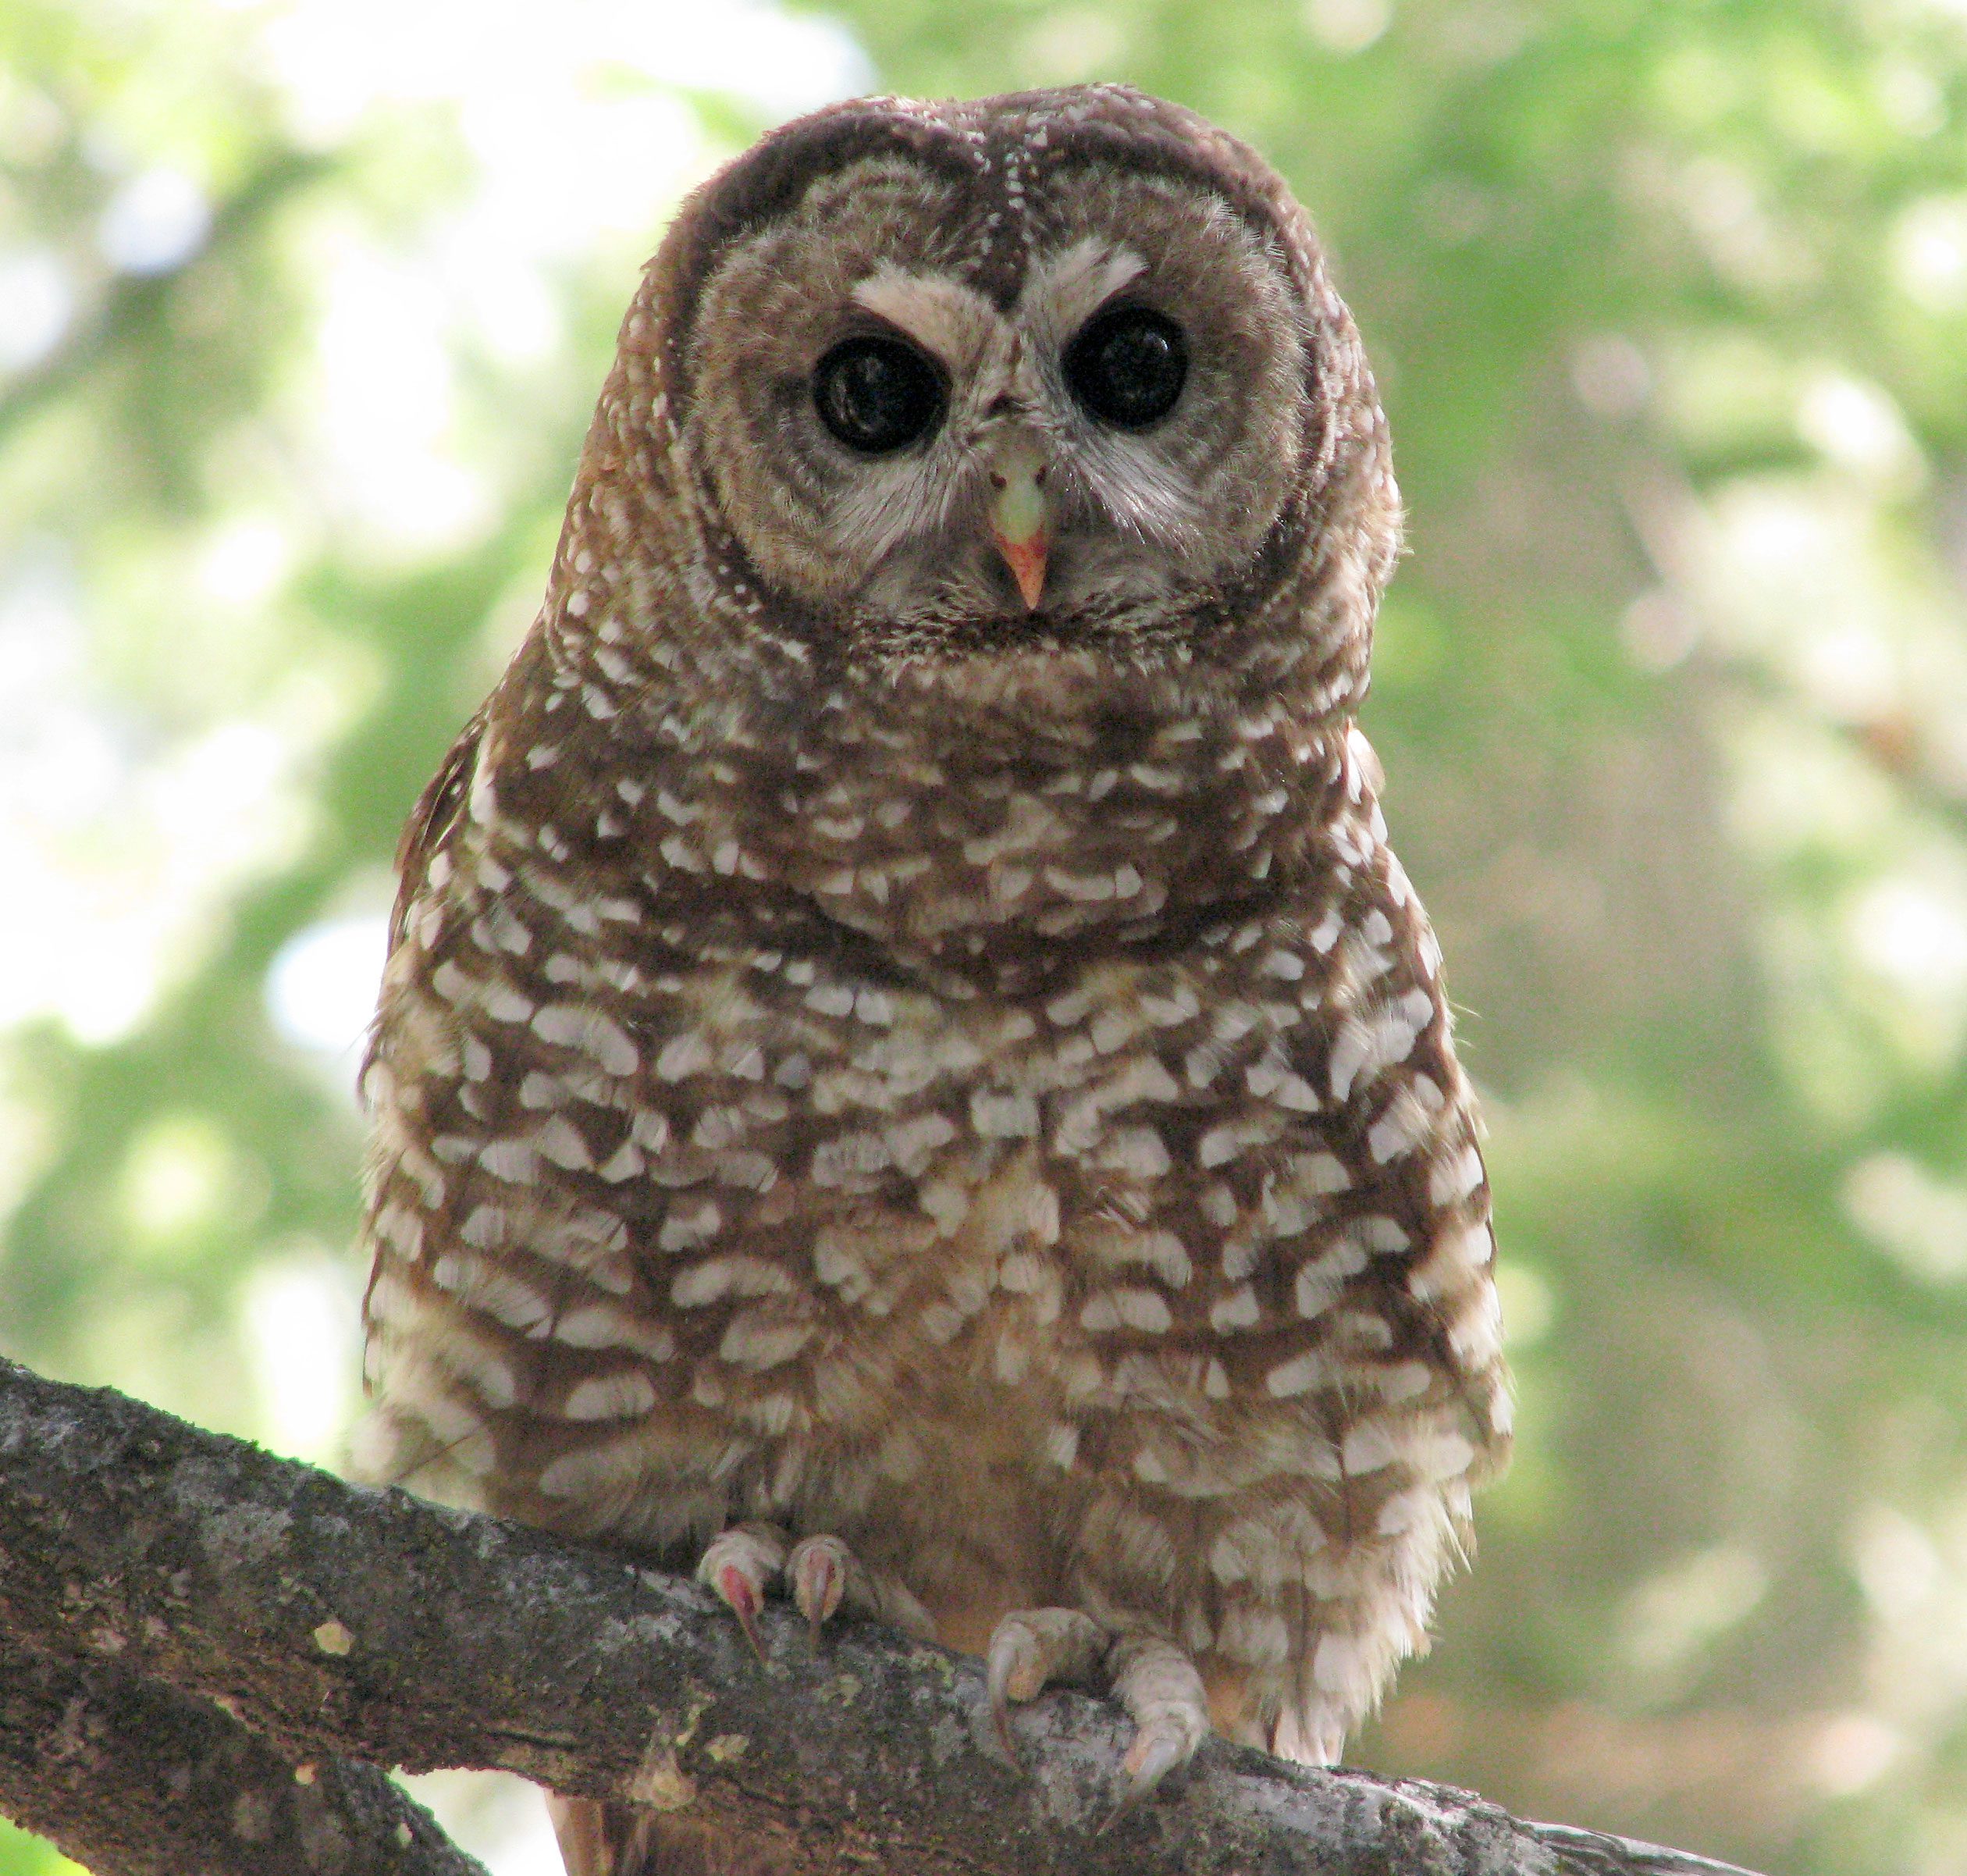 Spotted Owl from the study . Photo by S. Eyes.